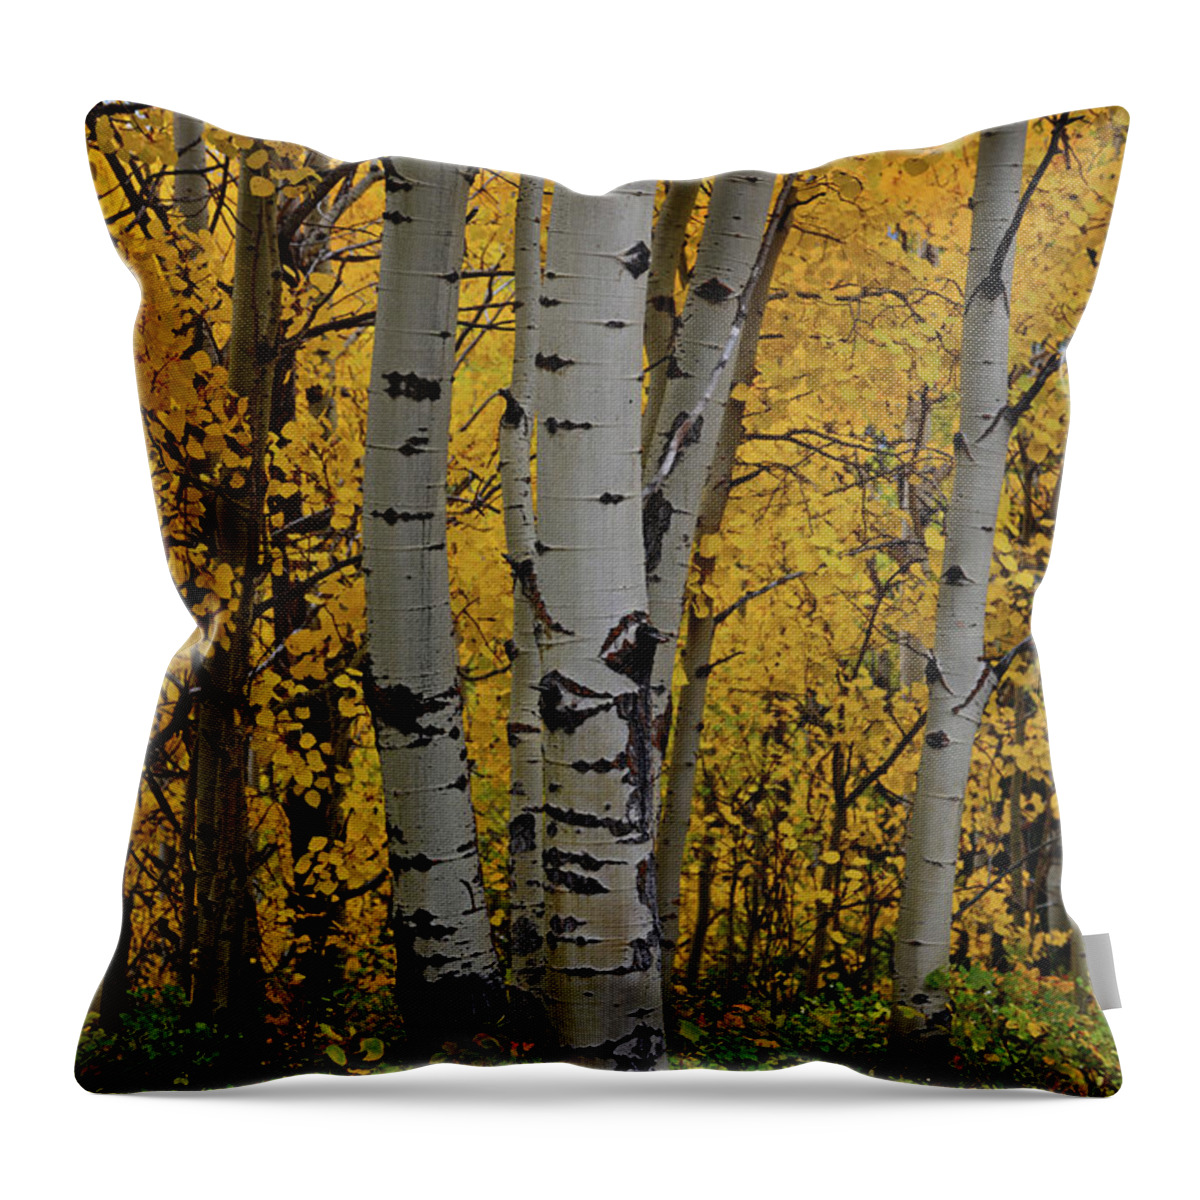 Aspen Throw Pillow featuring the photograph Aspen Golden by Whispering Peaks Photography